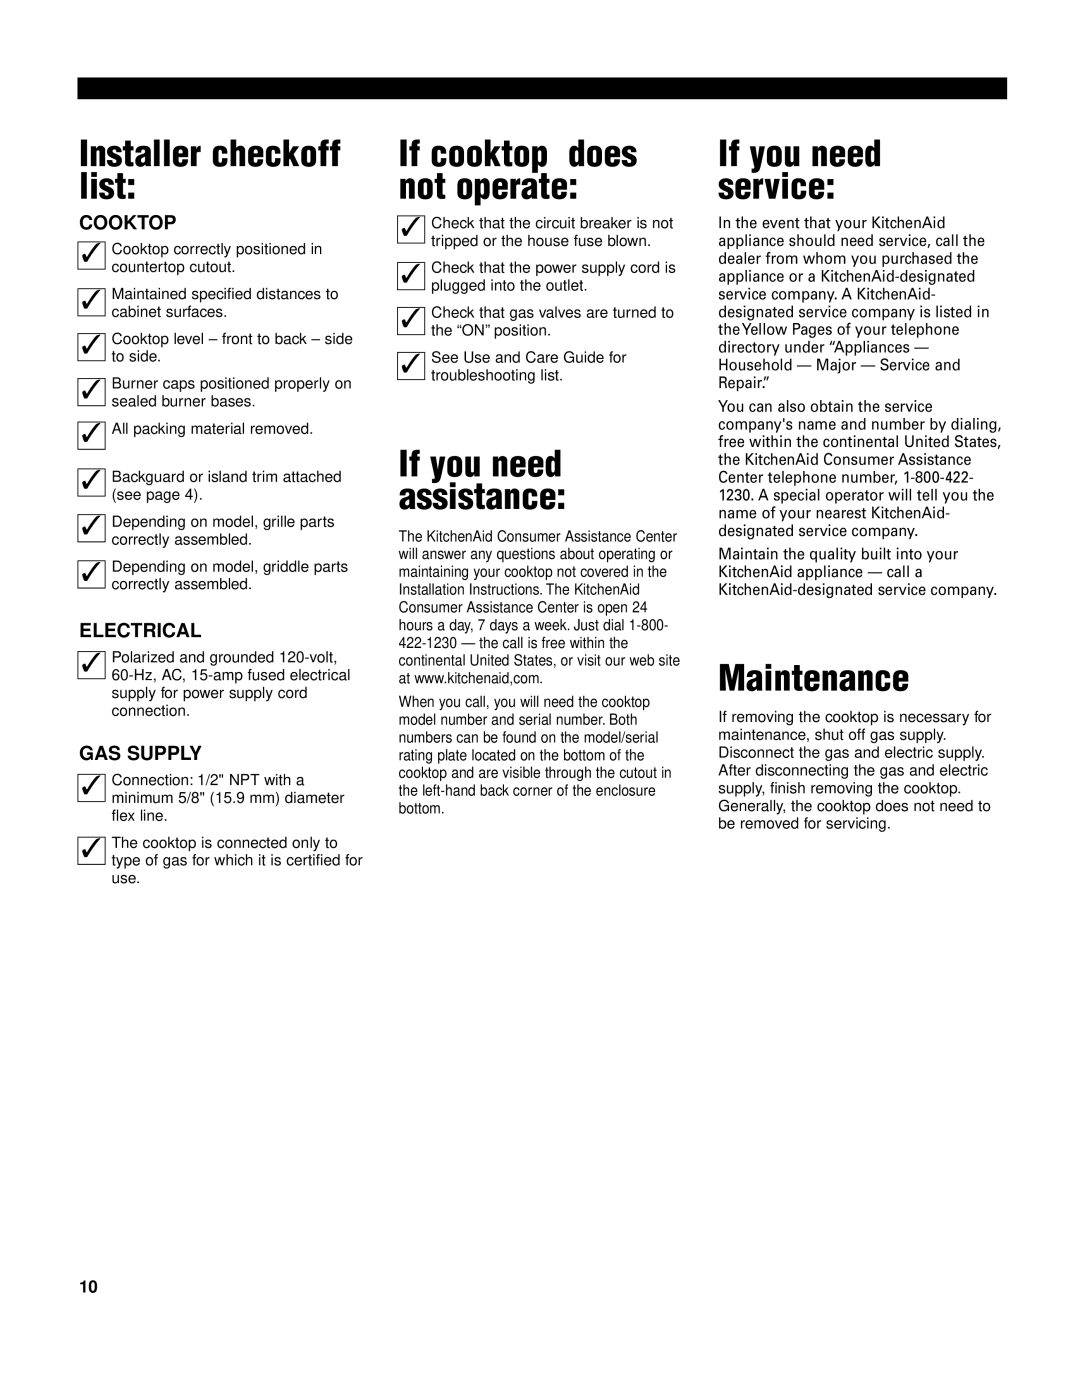 KitchenAid KGCP462K Installer checkoff list, Maintenance, If cooktop does not operate, If you need assistance 